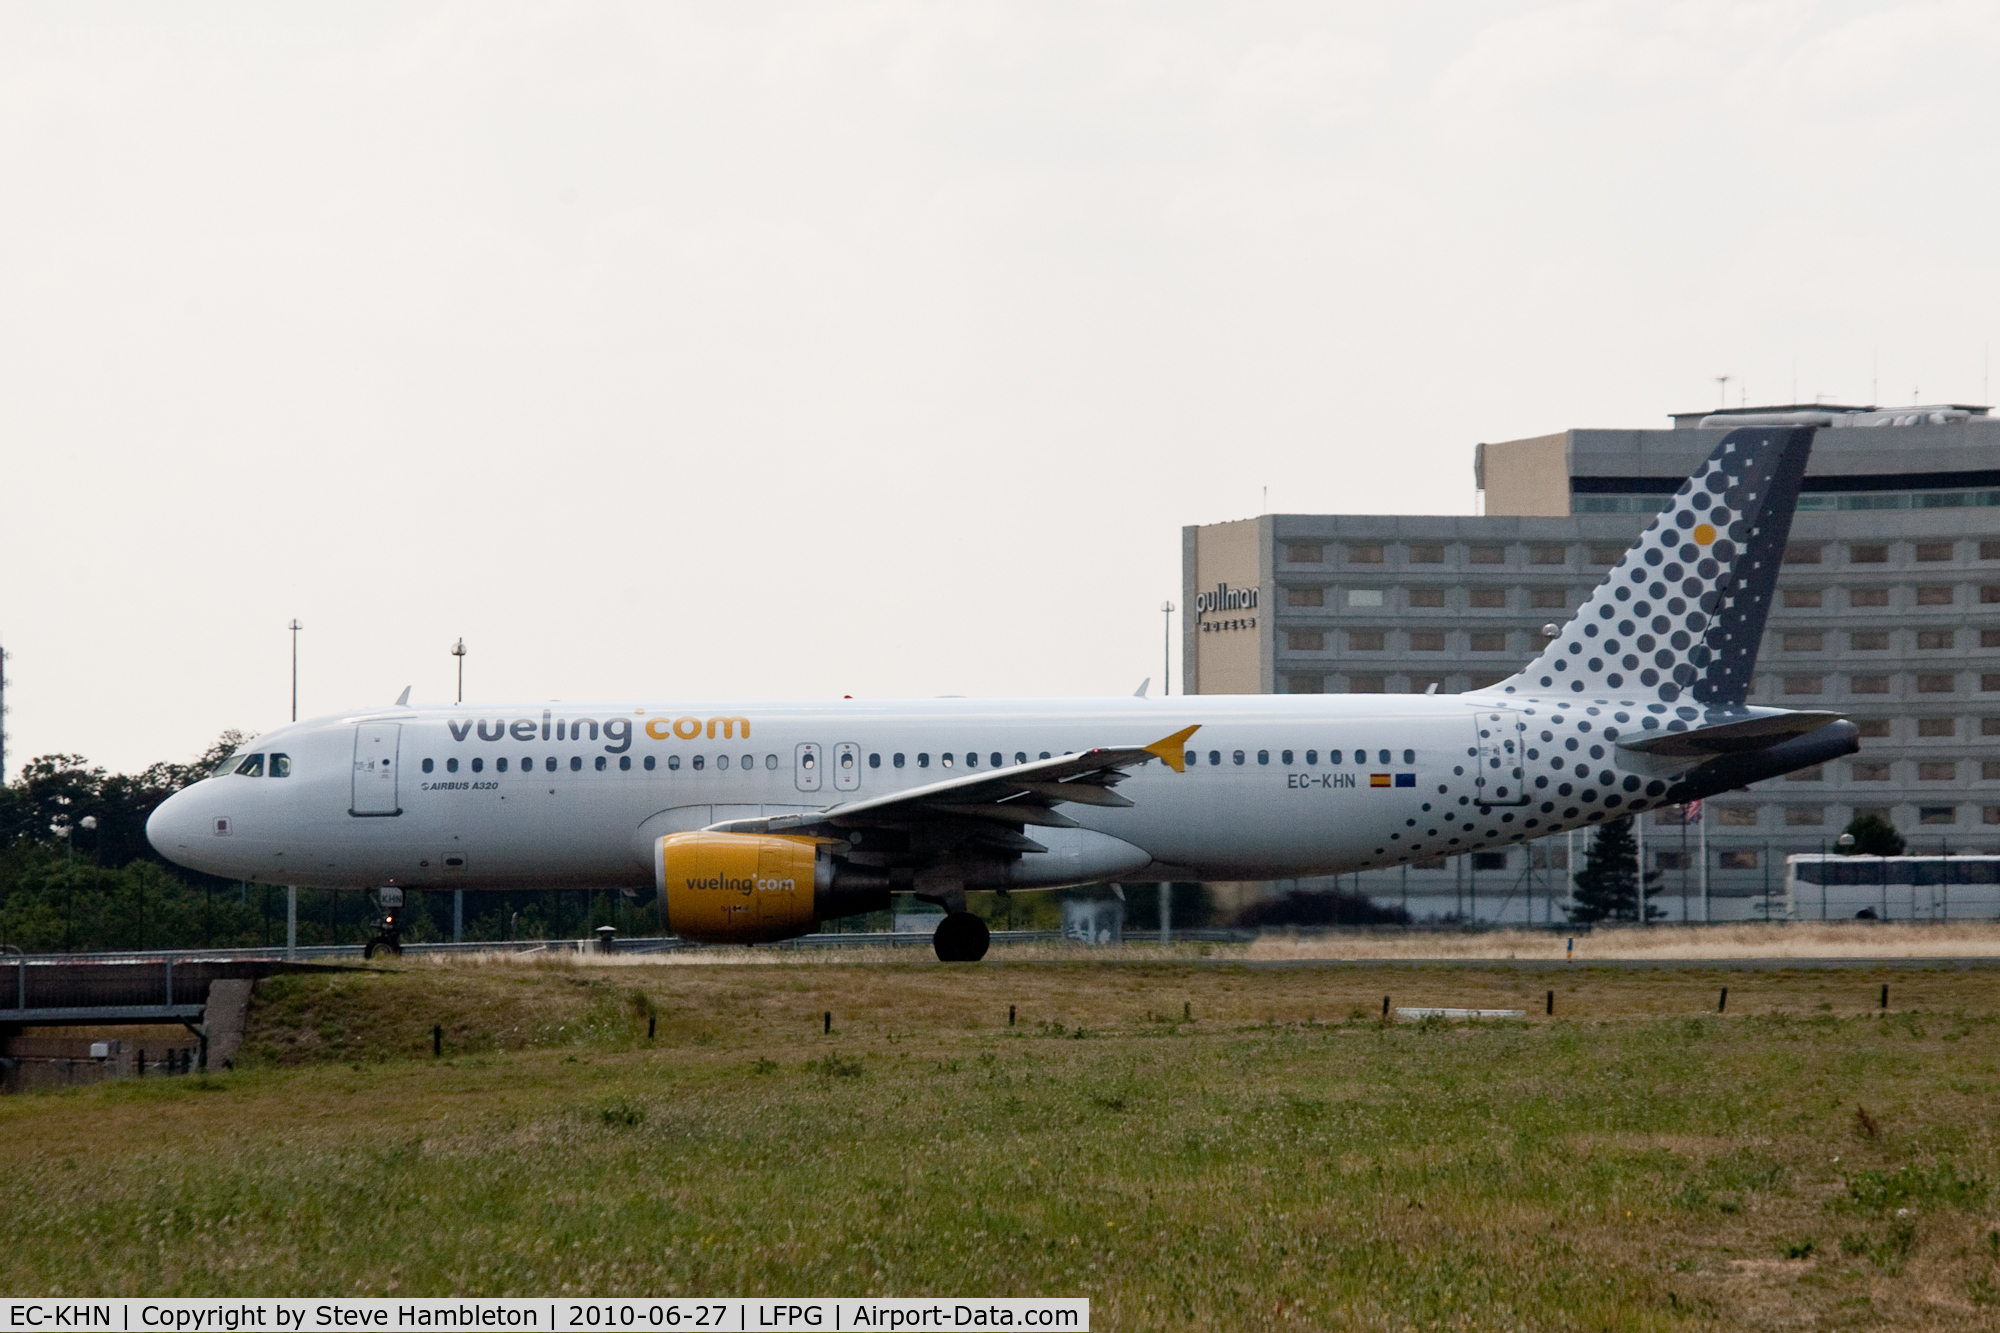 EC-KHN, 2007 Airbus A320-216 C/N 3203, From the 